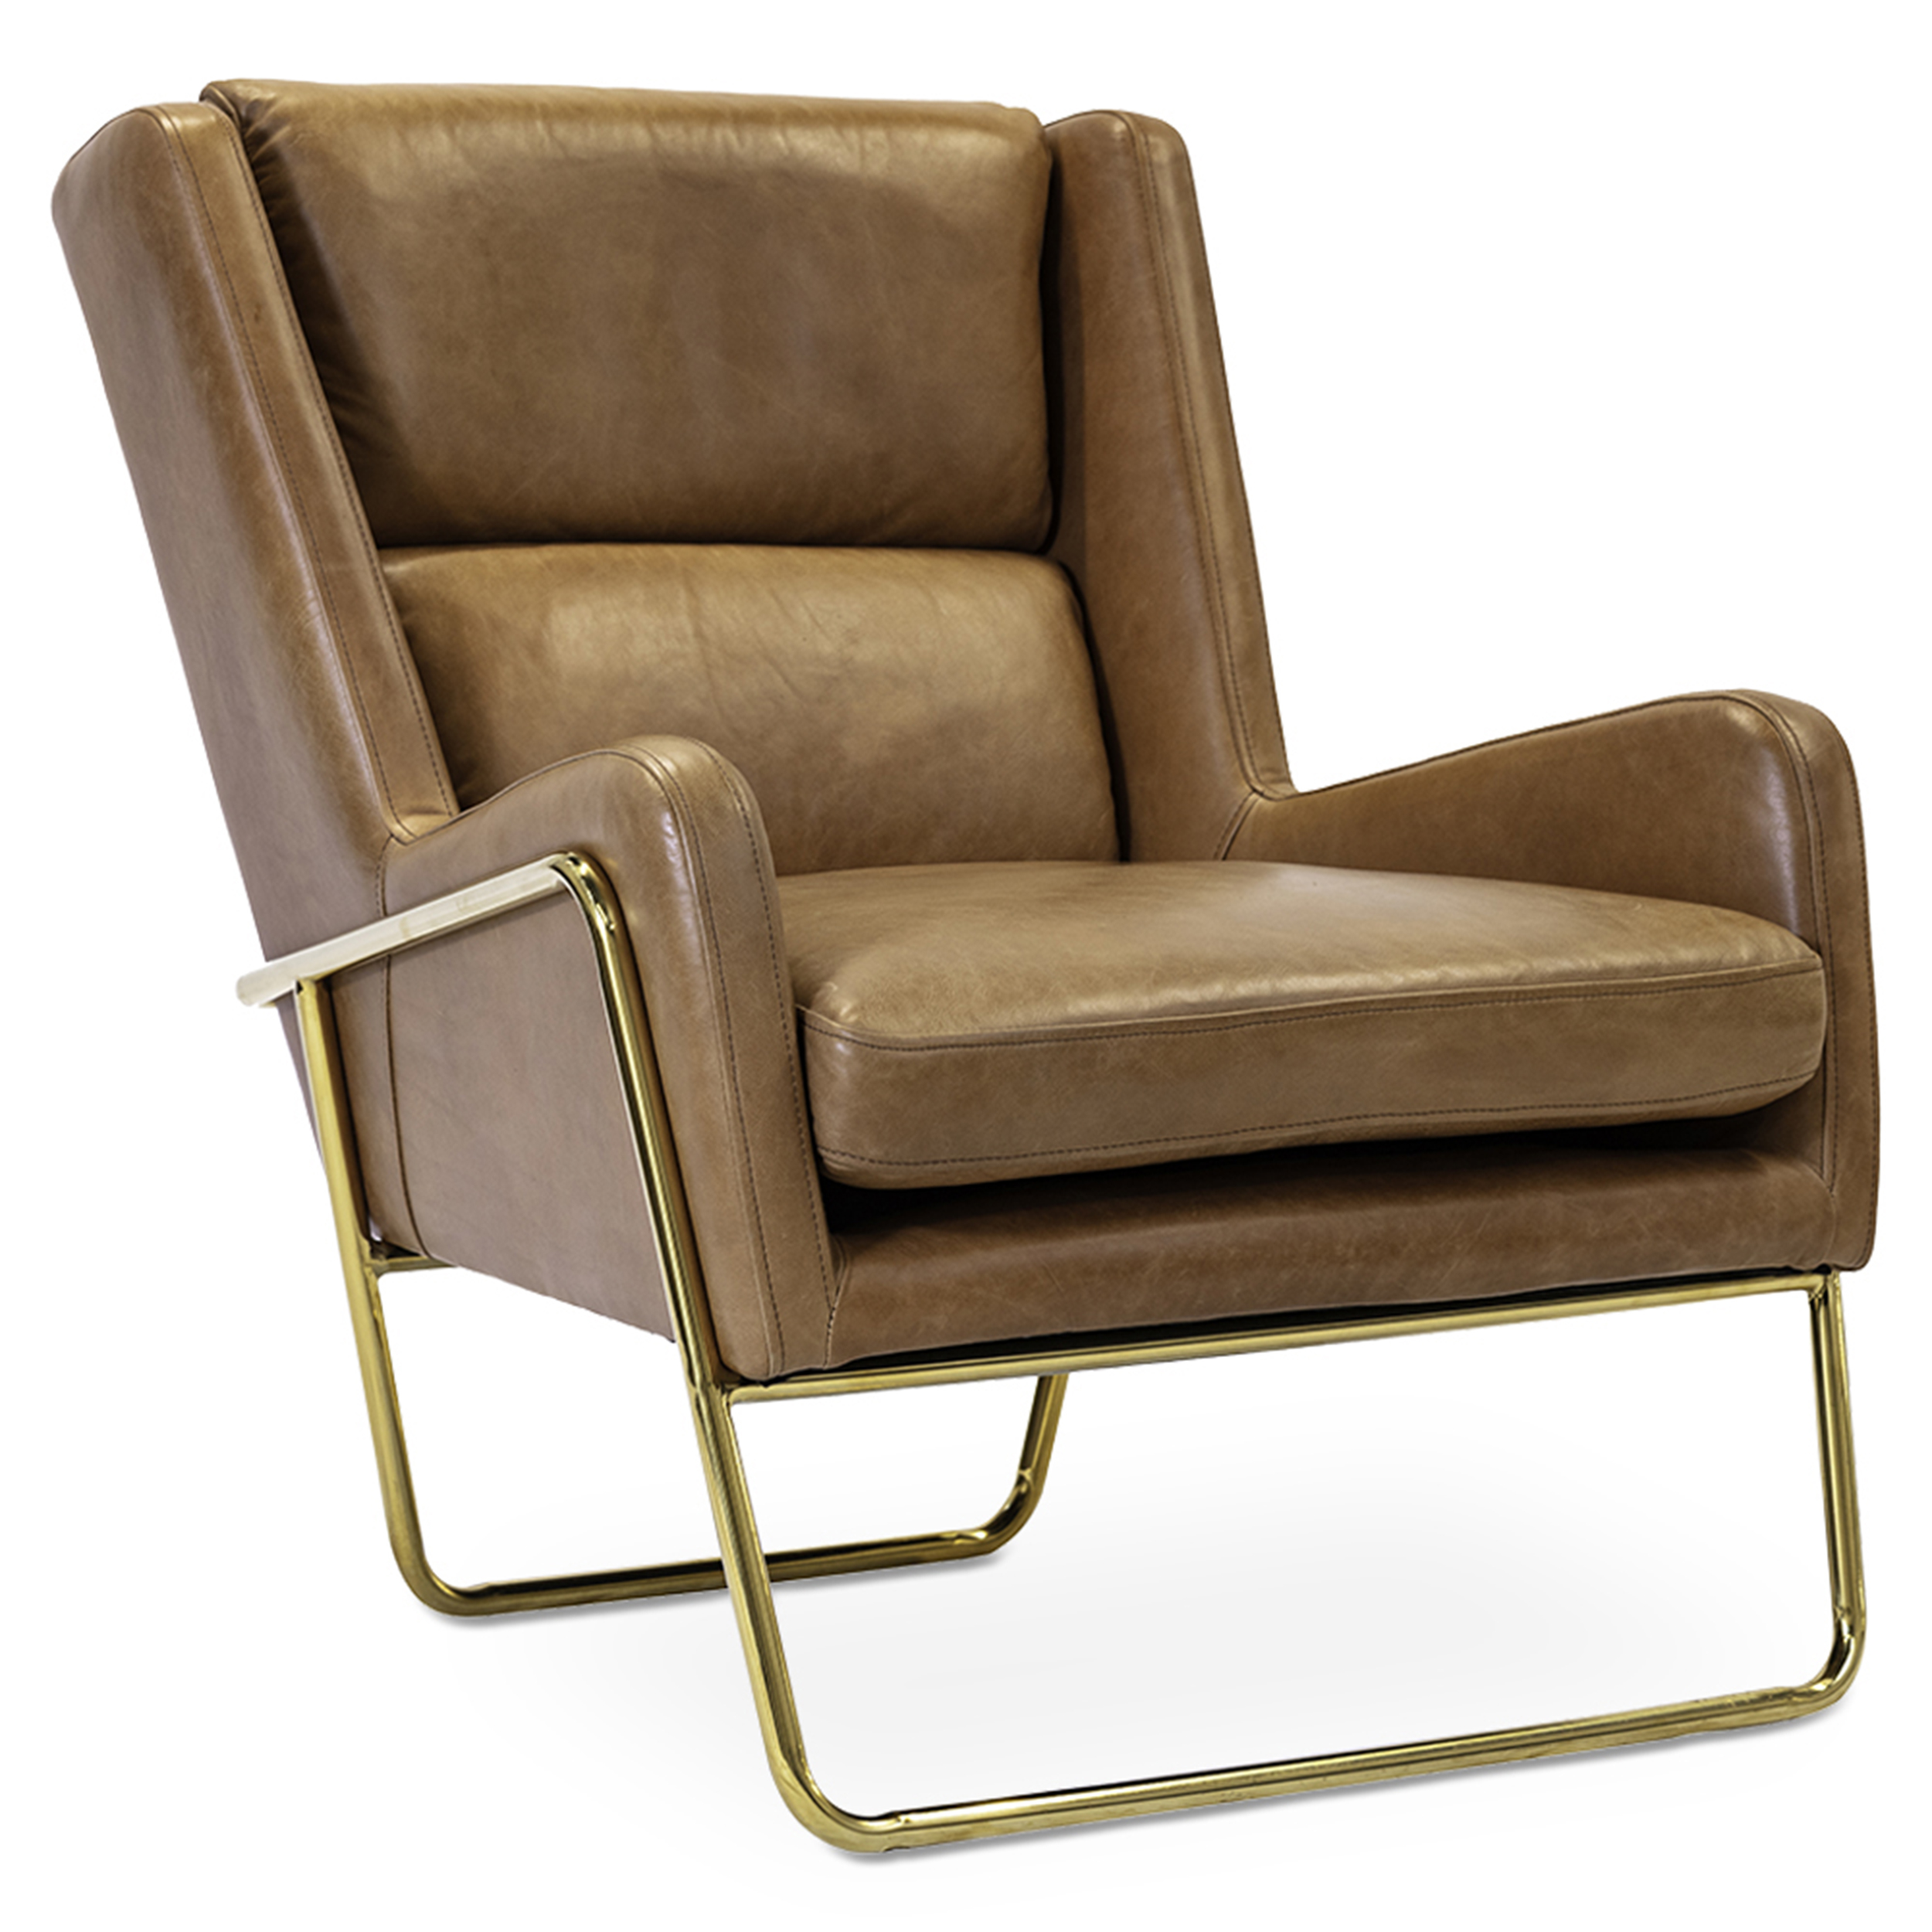 WS - London armchair - Light Brown & Brass (Front angle)